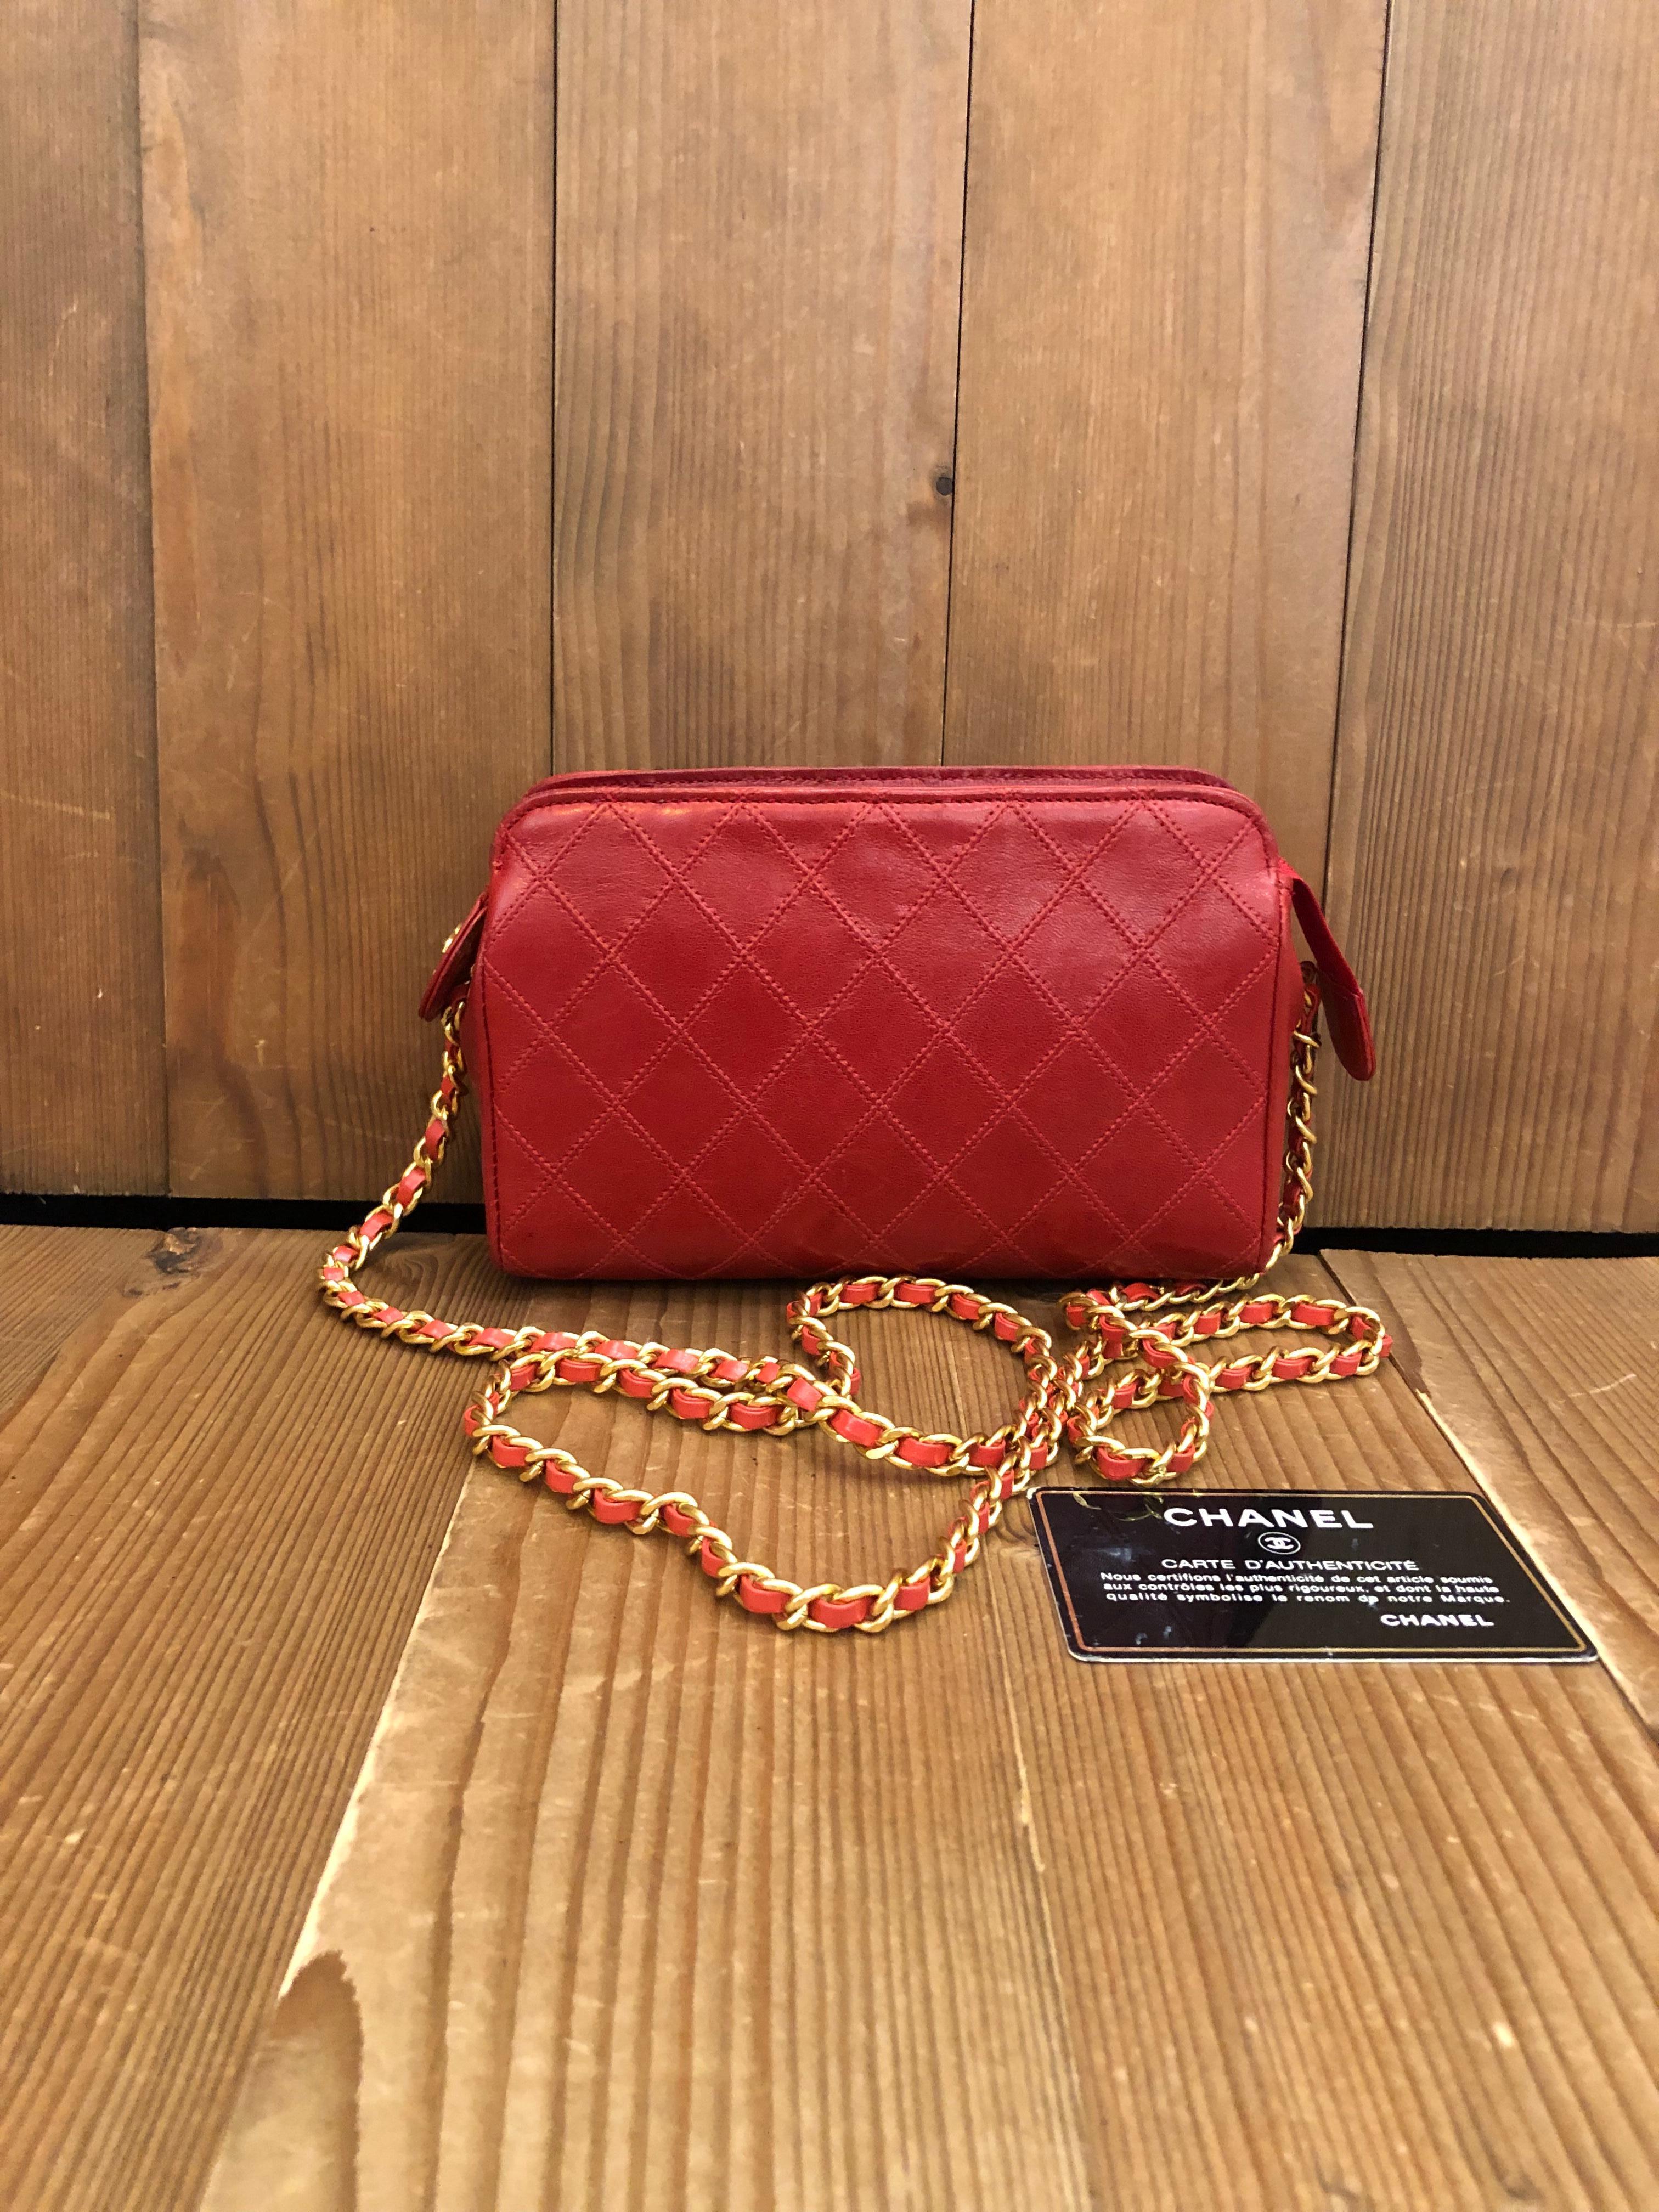 This vintage CHANEL vanity pouch bag is crafted of diamond quilted lambskin leather in red. Top zipper closure opens to a new interior in beige. Holo 3xxxxxx series (1994 - 1996) made in France (stamps removed in the re-lining process). Measures